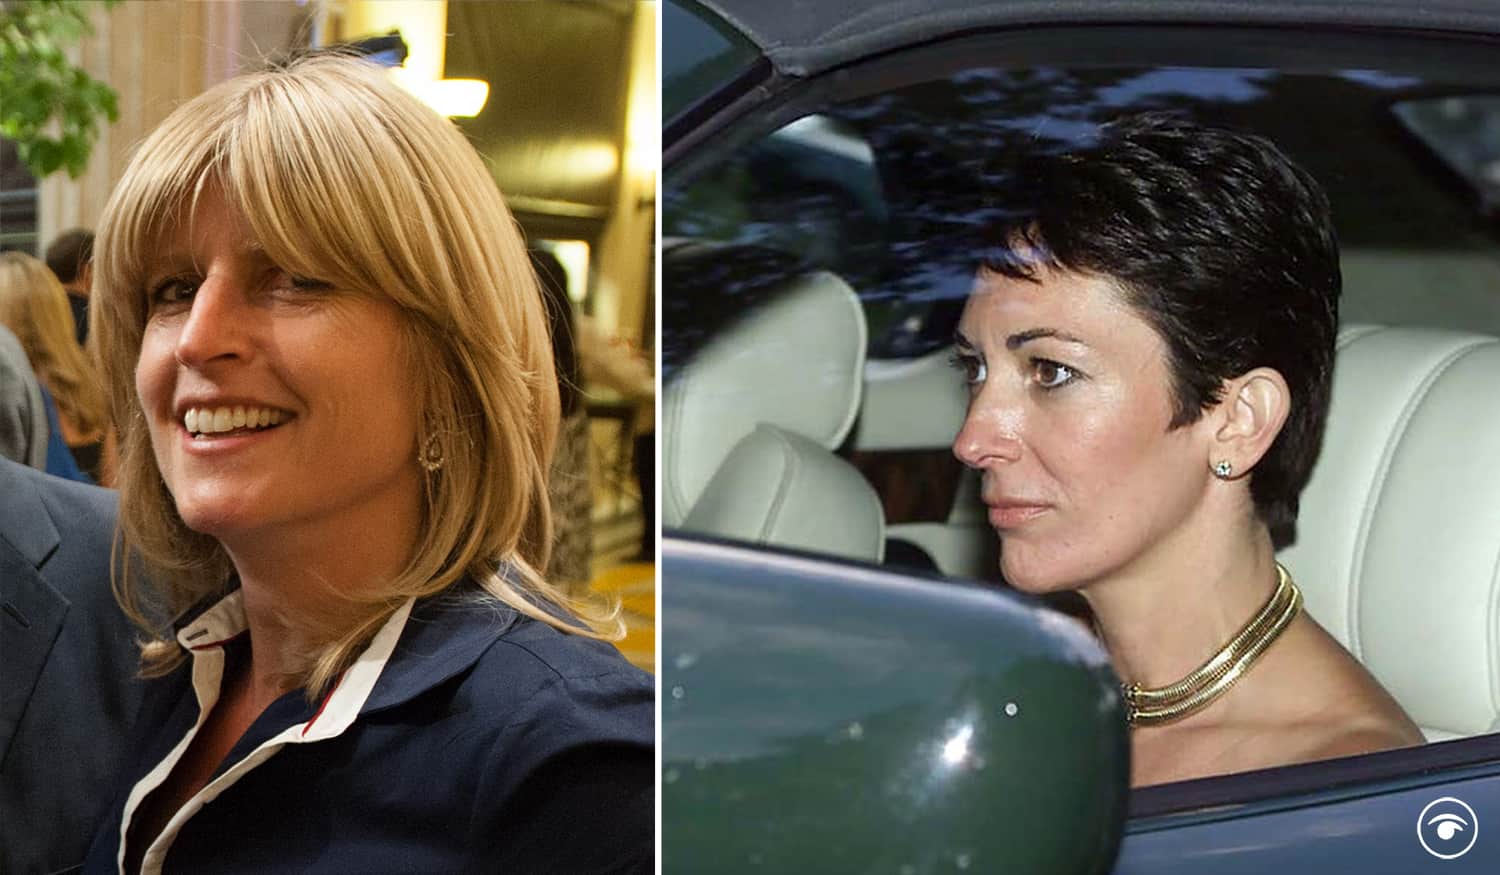 PM’s sister says it’s hard not to feel ‘a batsqueak of pity for Ghislaine Maxwell’